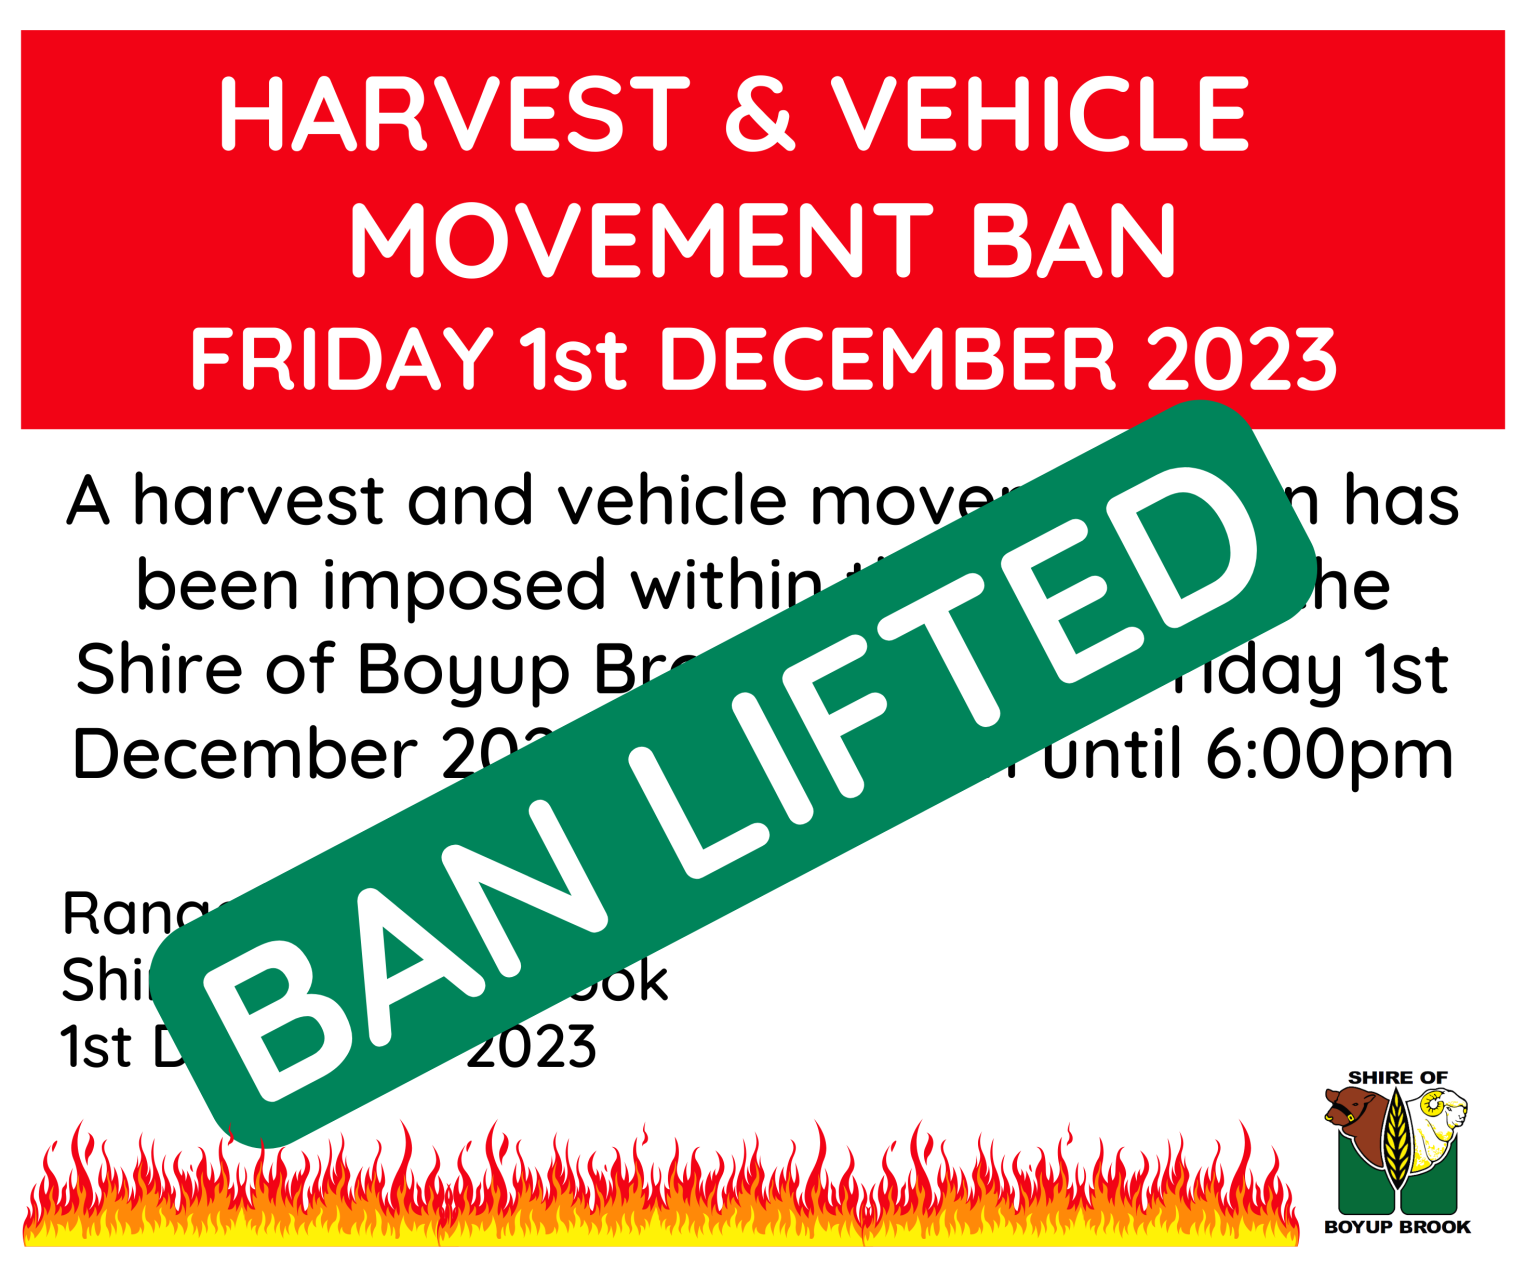 Harvest and Vehicle Movement Ban Friday 1st December 2023 from 1:15pm -